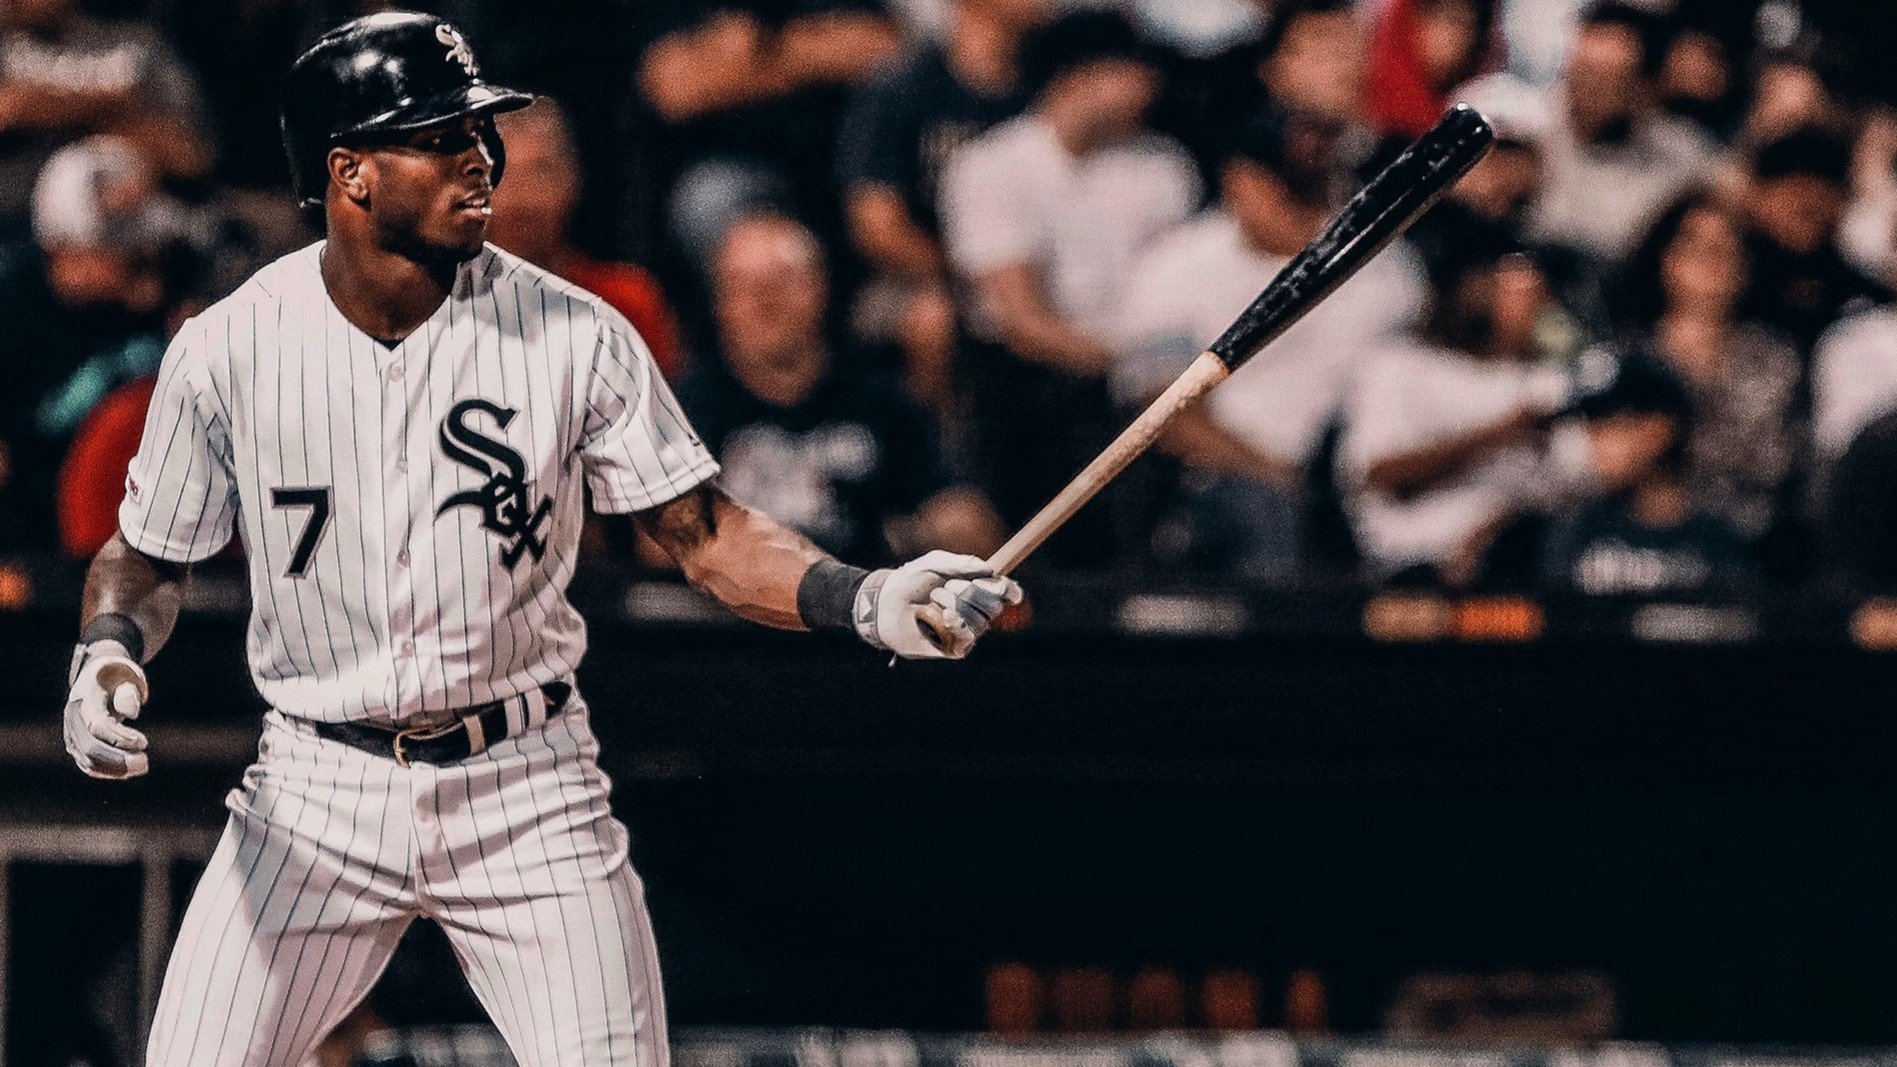 Following breakout year, Tim Anderson may be ready to reach new levels